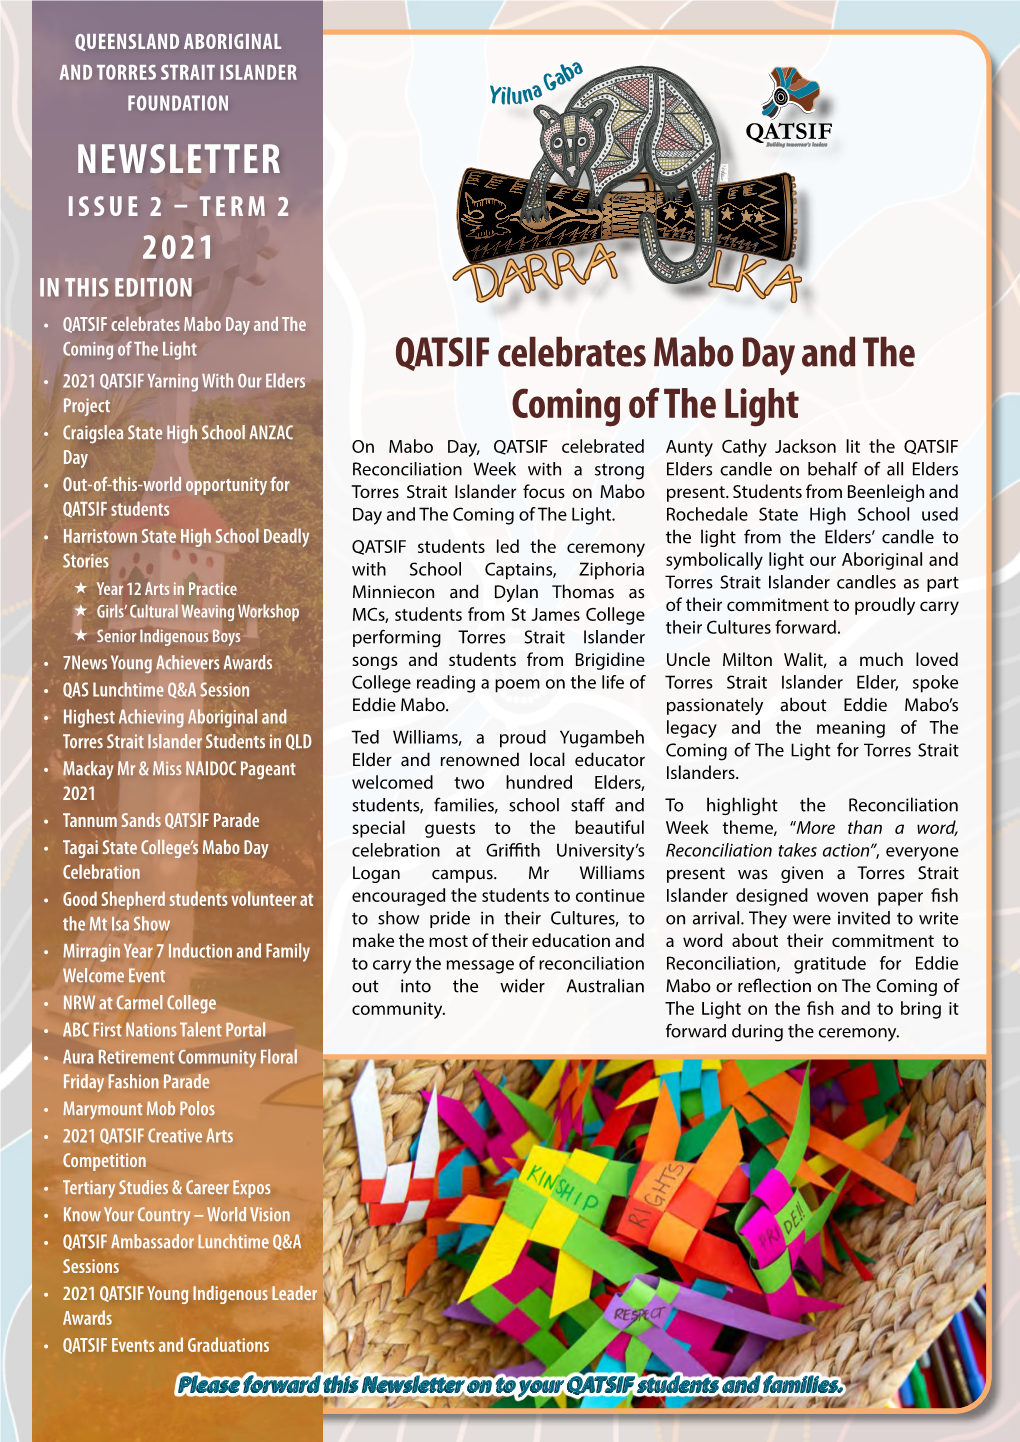 QATSIF Celebrates Mabo Day and the Coming of the Light NEWSLETTER